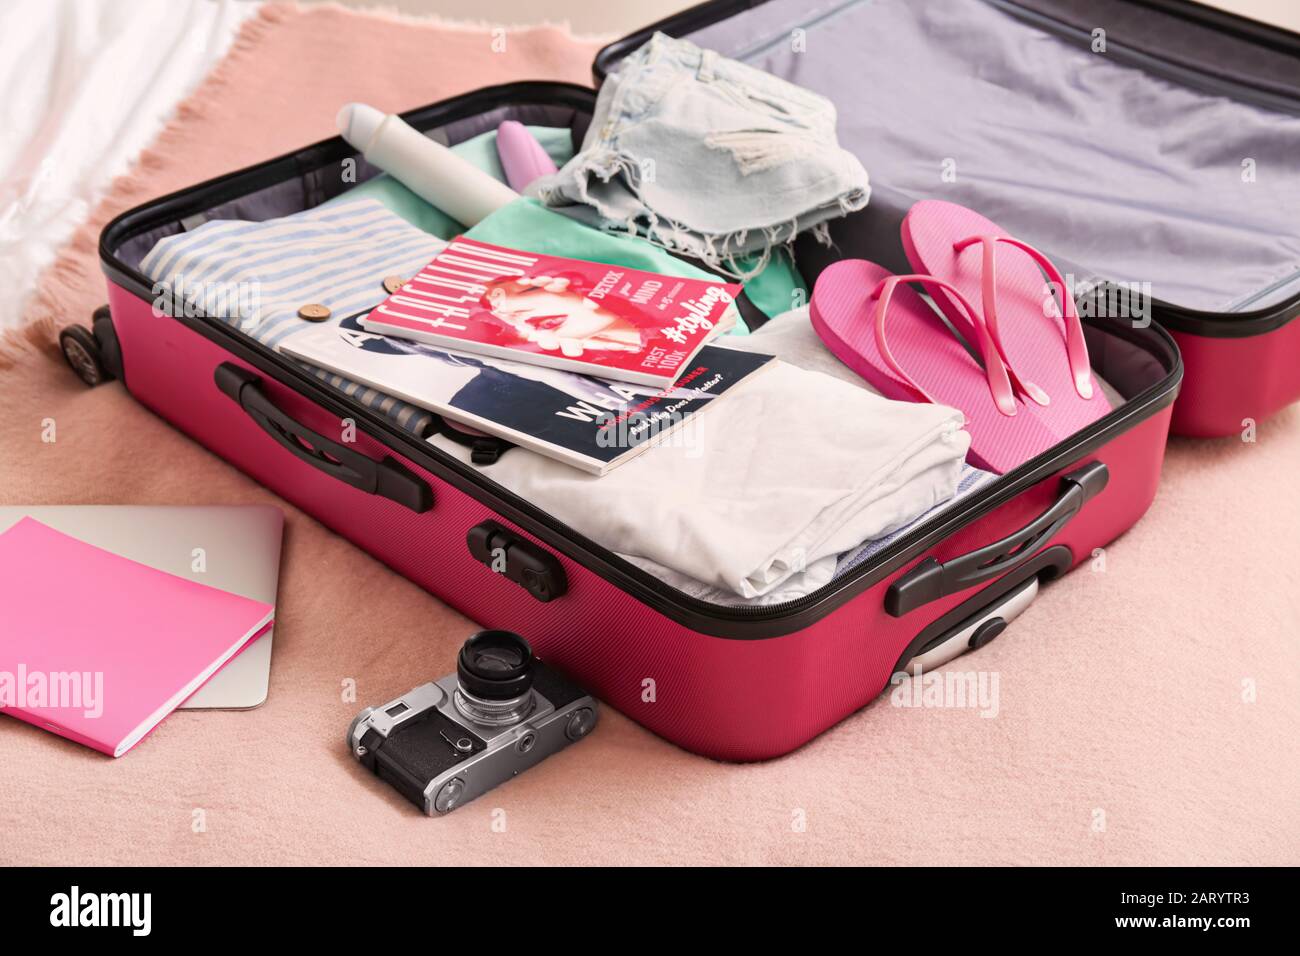 Open suitcase with packed clothes and accessories on bed Stock Photo